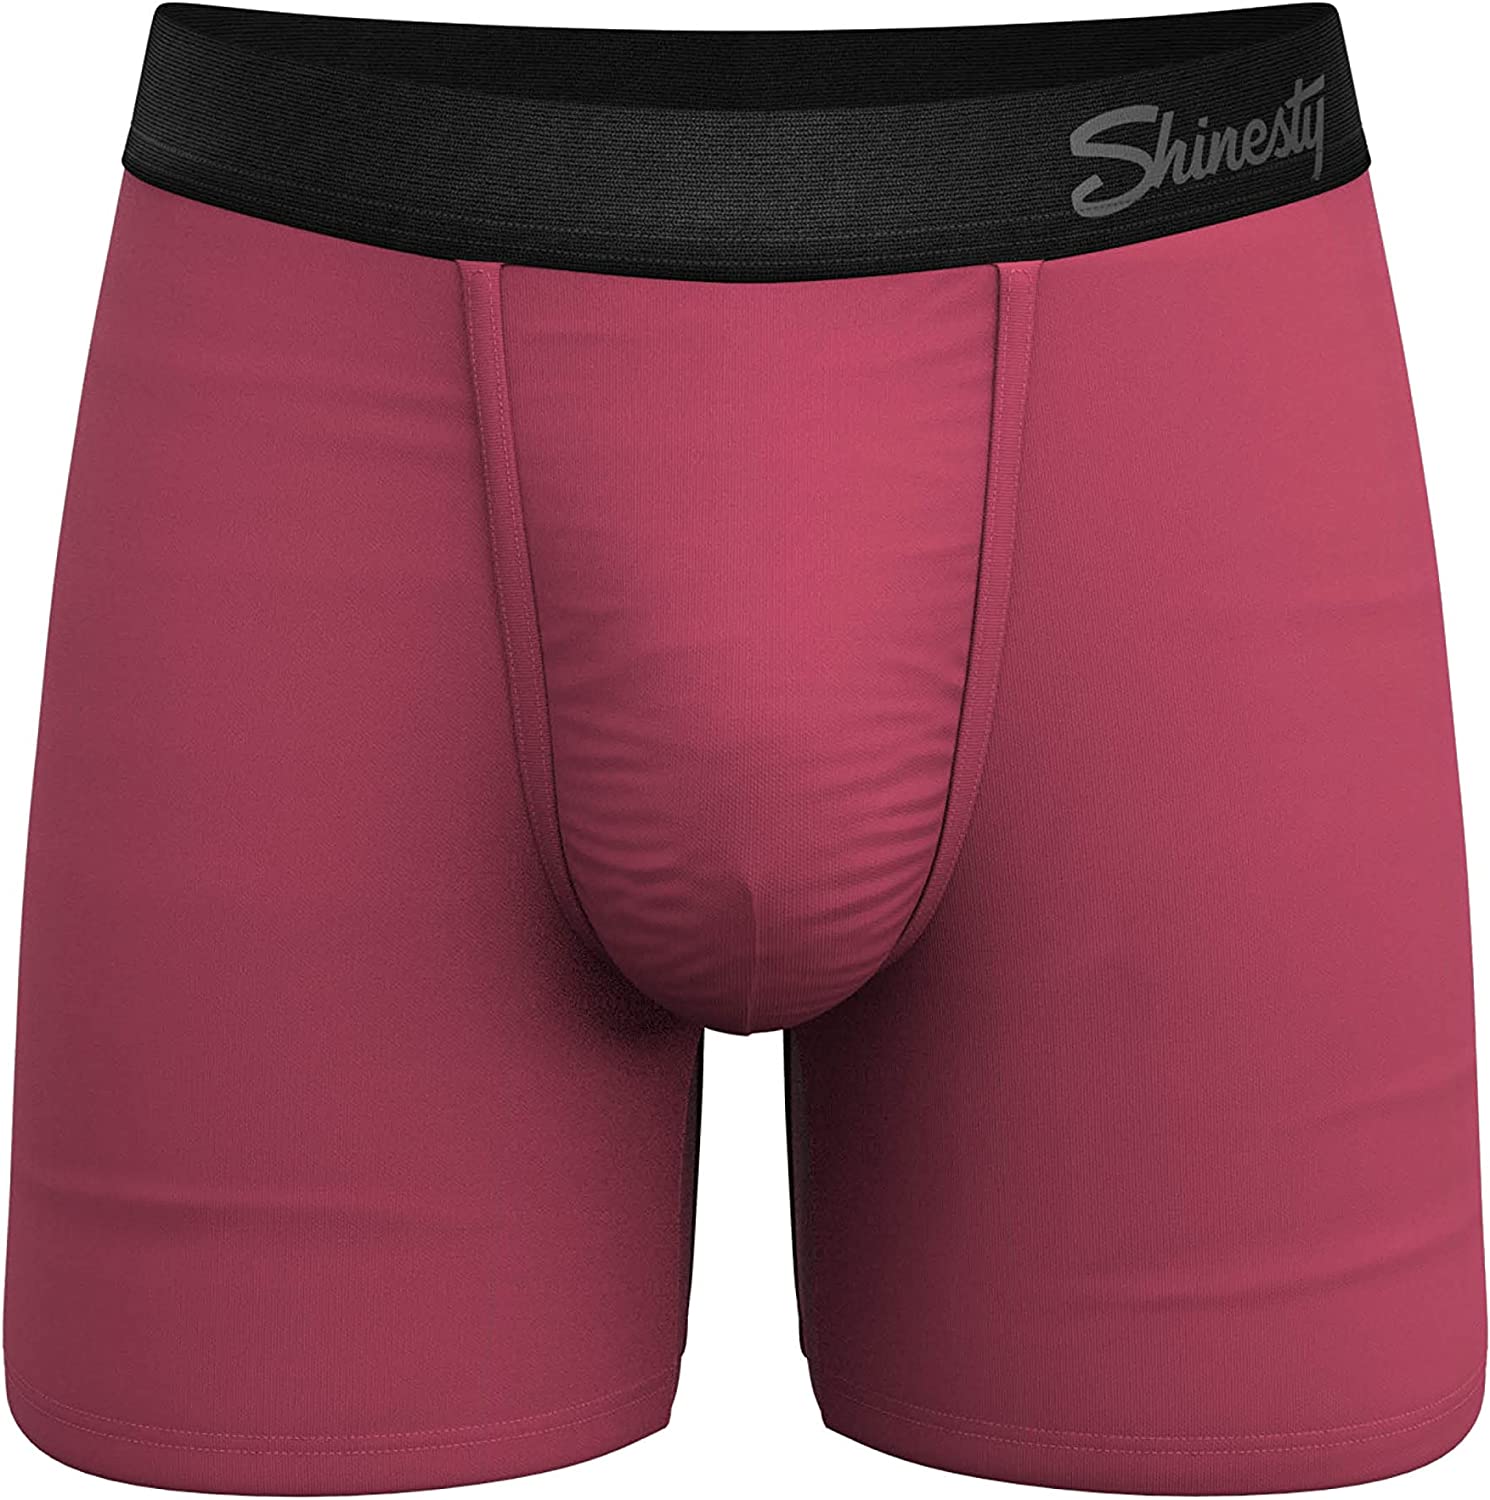 Shinesty Men's Boxers Subscription Review + Coupon - Hello Subscription